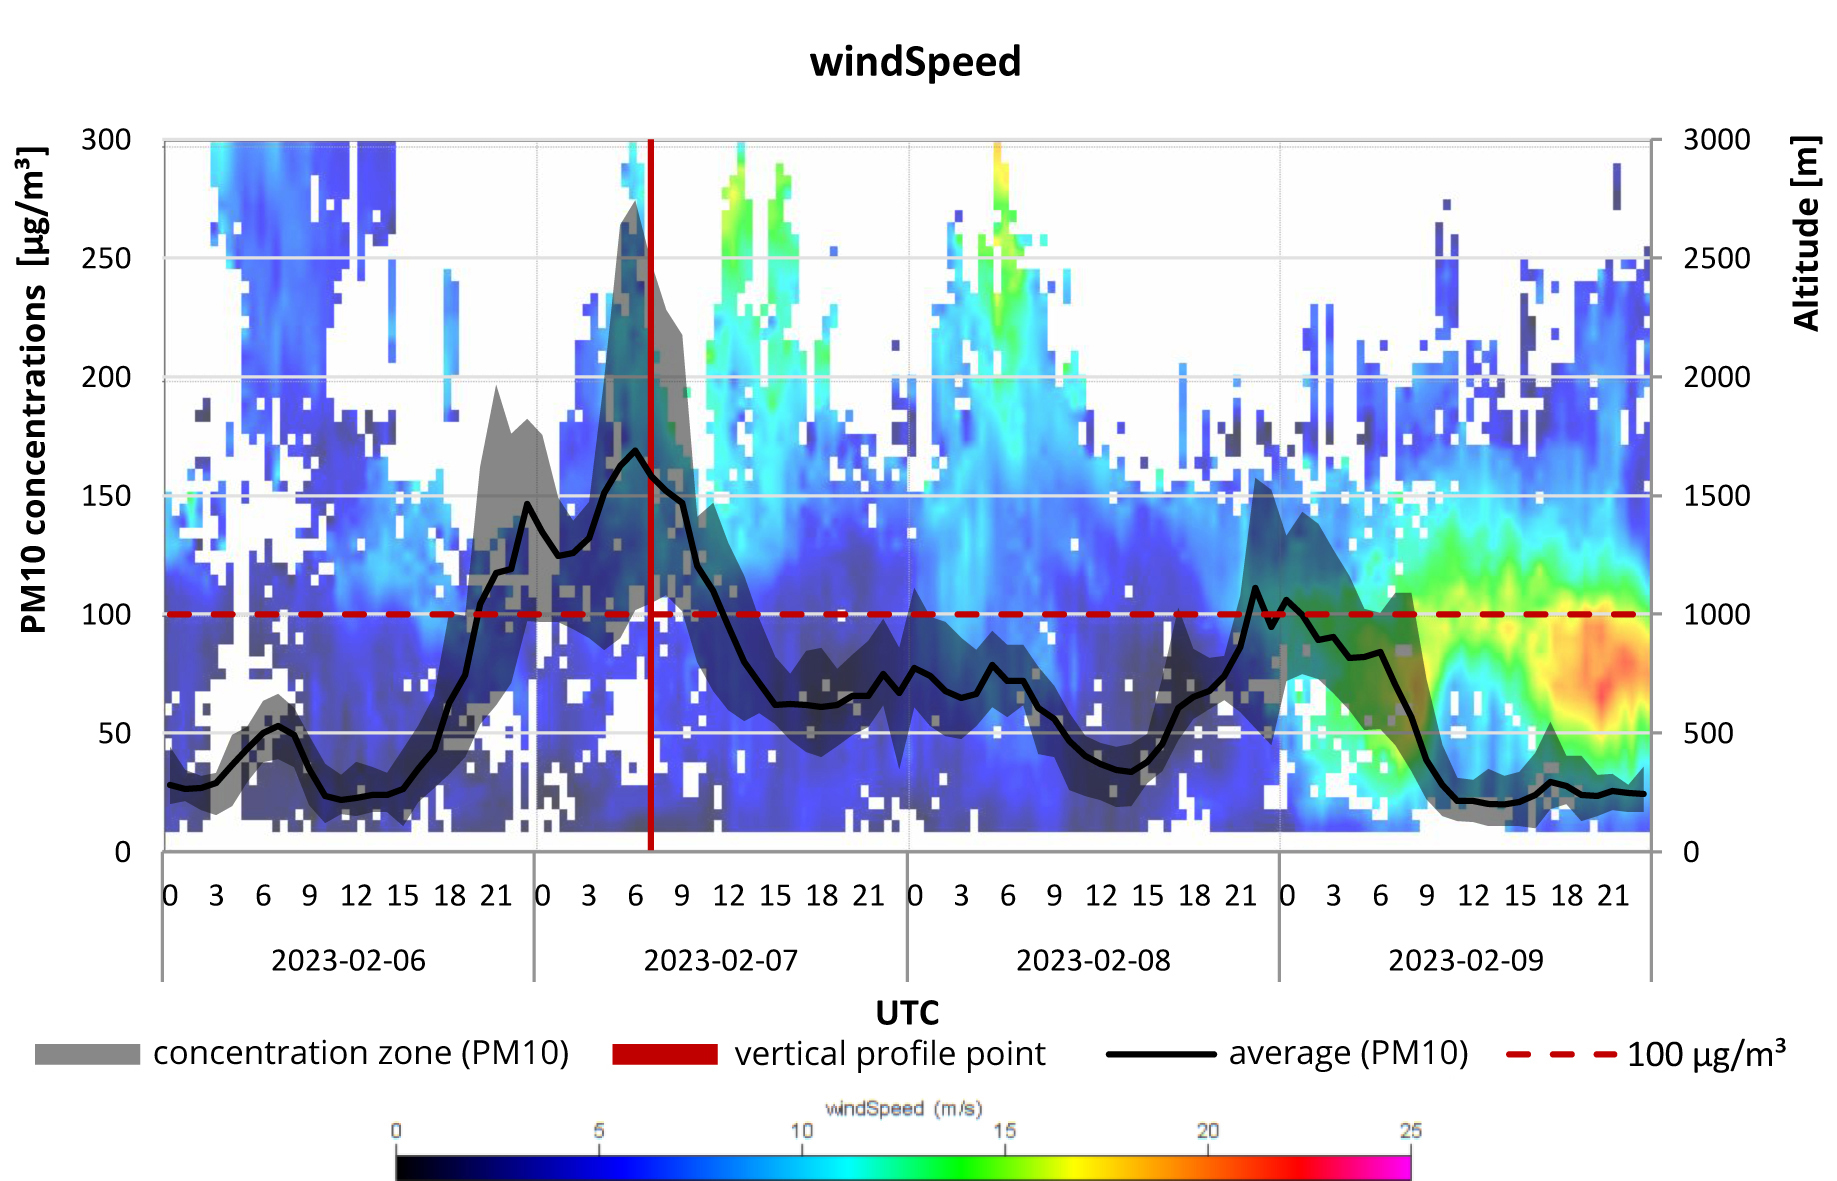 Course of instantaneous PM10 concentrations at an altitude of 3‍ m above ground level against wind speed up to an altitude of 3000 m above ground level during the dust concentration episode in February 2023 in Racibórz.